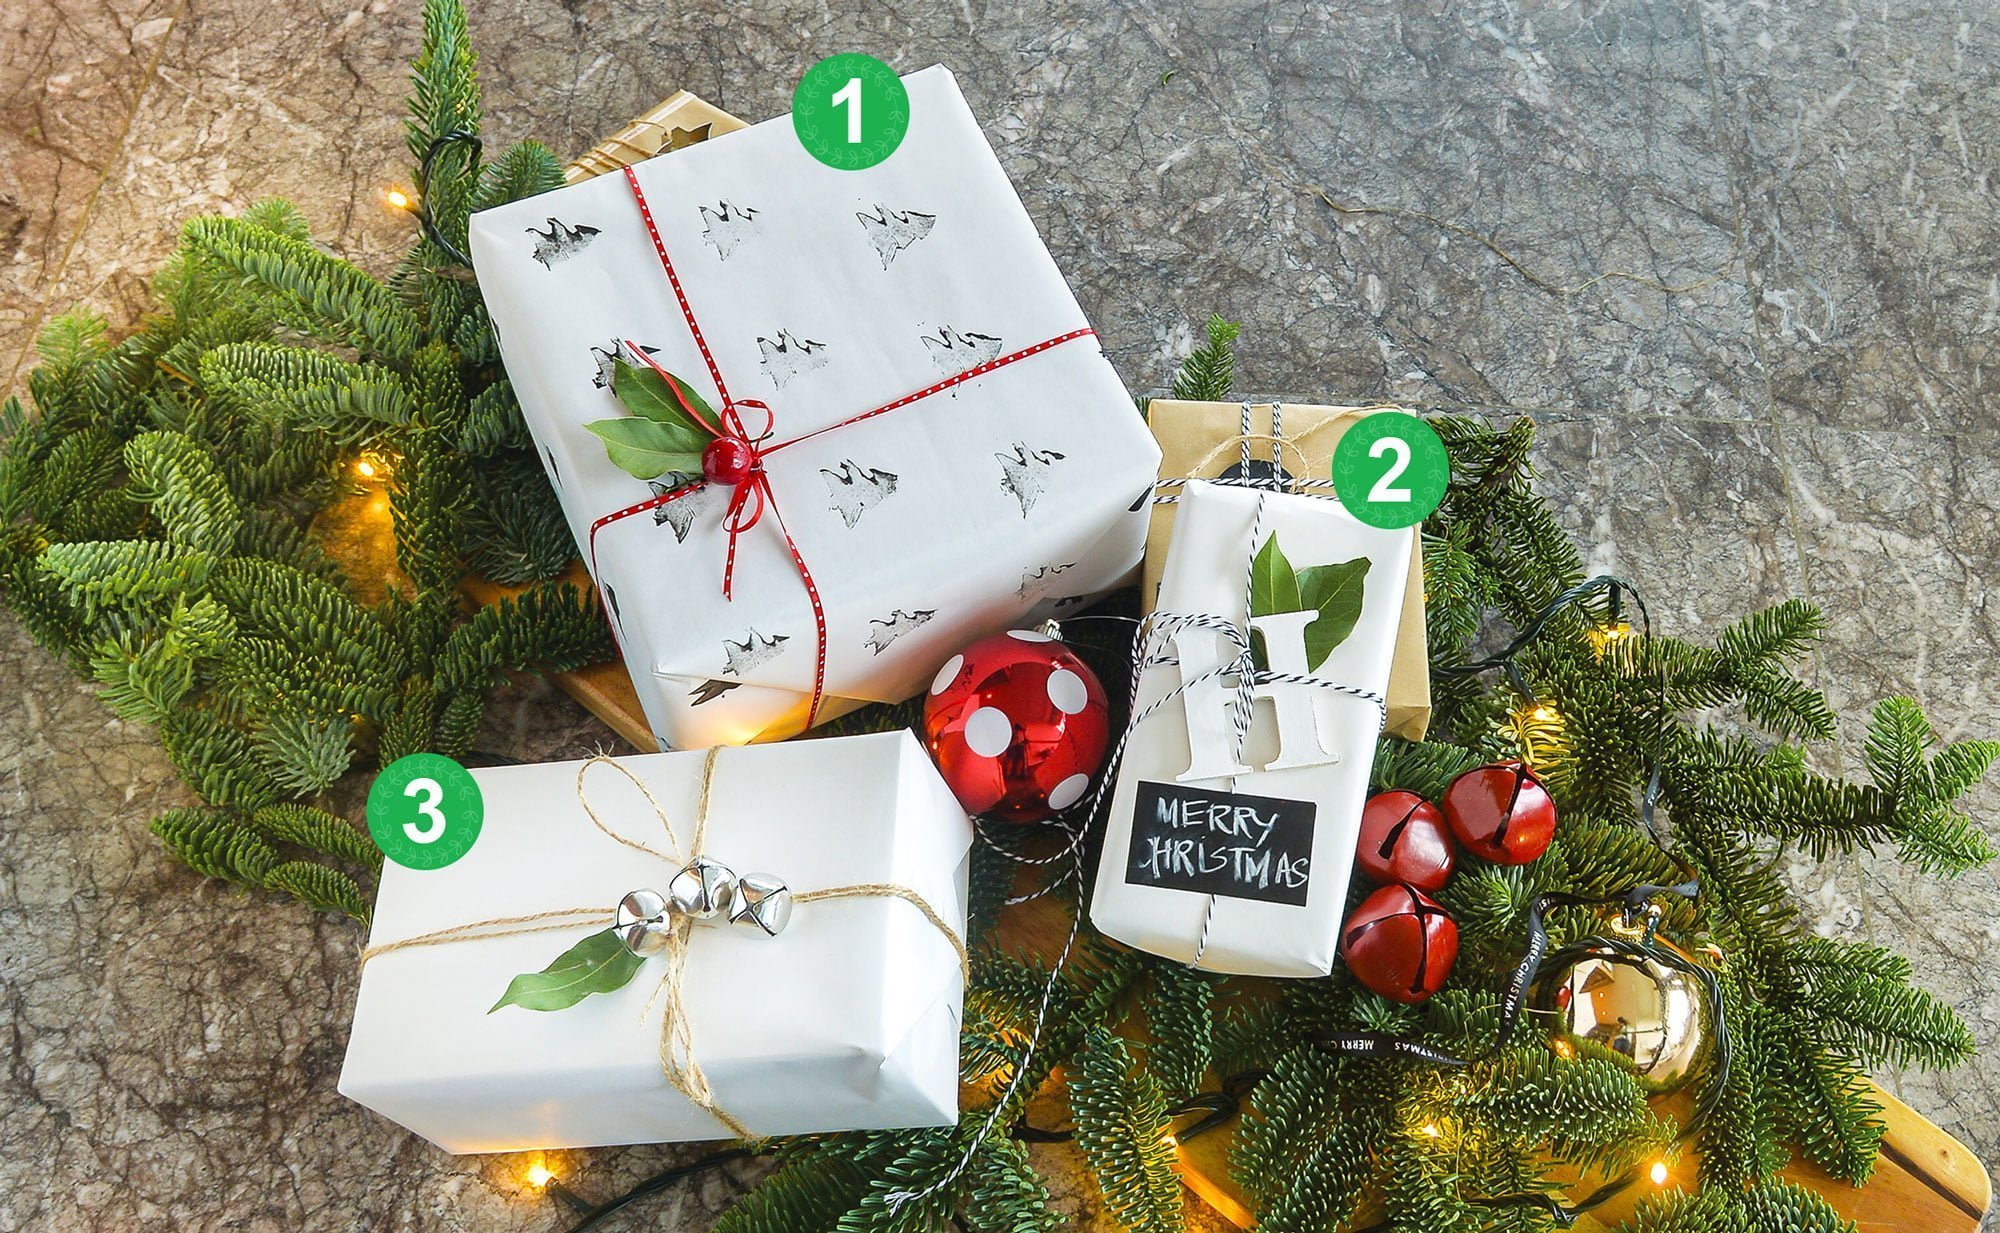 Christmas-present-wrapping-selection-of-white-wrapped-presents-on-pine